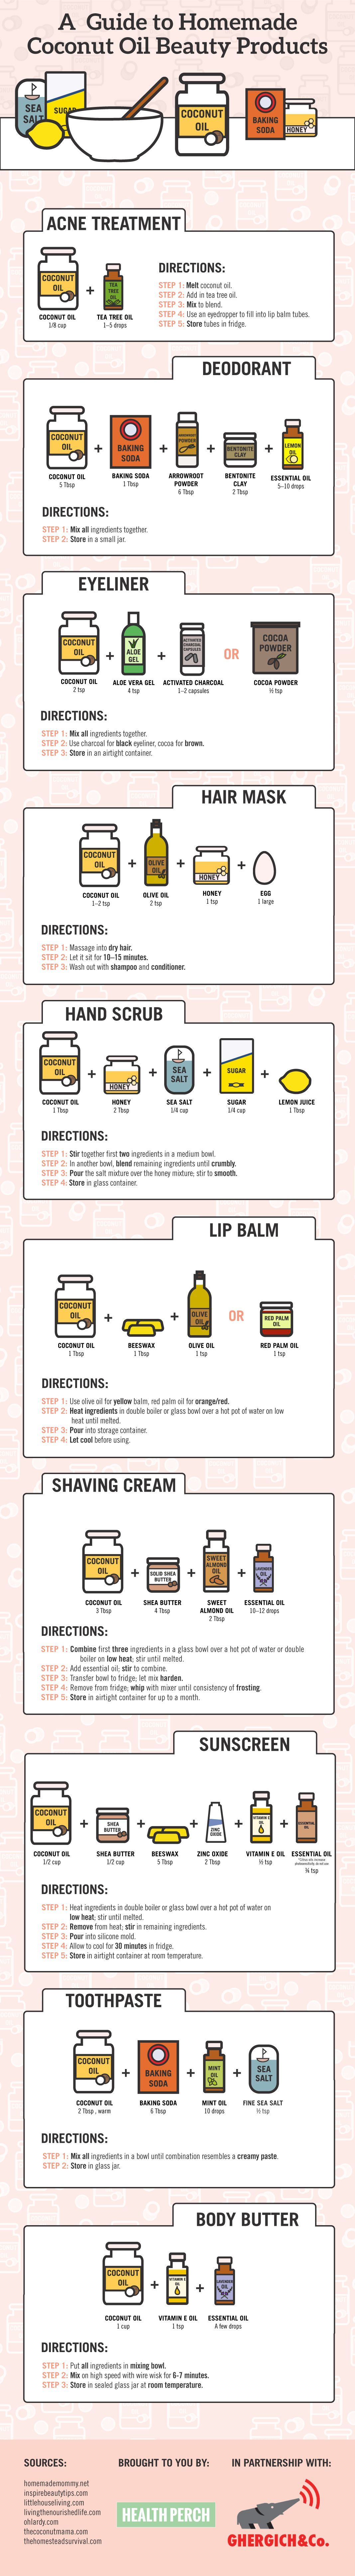 10 Recipes for Homemade Coconut Oil Beauty Products – Make Your Own Coconut Oil Beauty Products